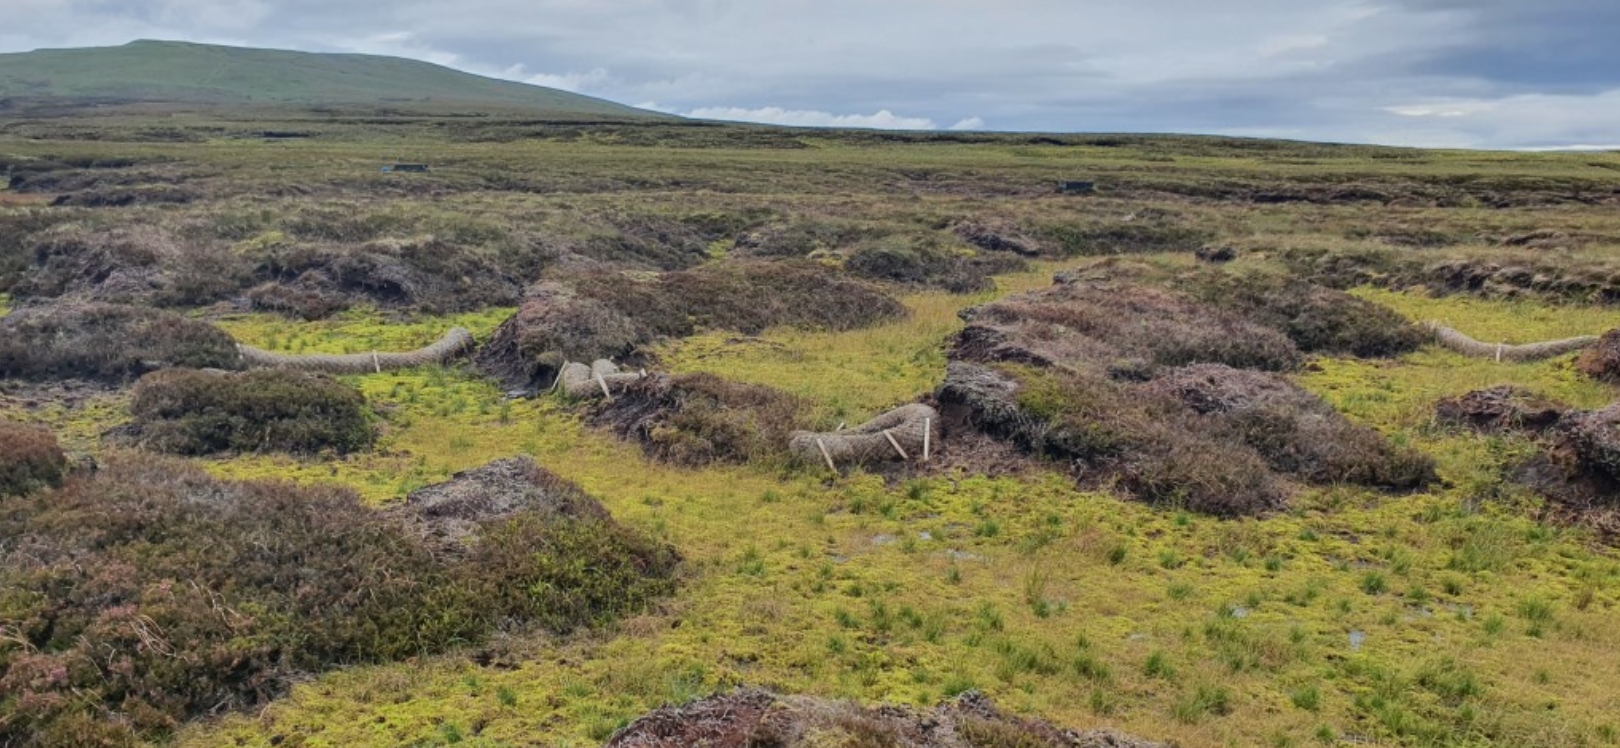 © North Pennines National Landscape, of a damaged peatland site in the North Pennines before, and three years after, restoration, and also images showing peatland restoration in progress in the North Pennines are attached.